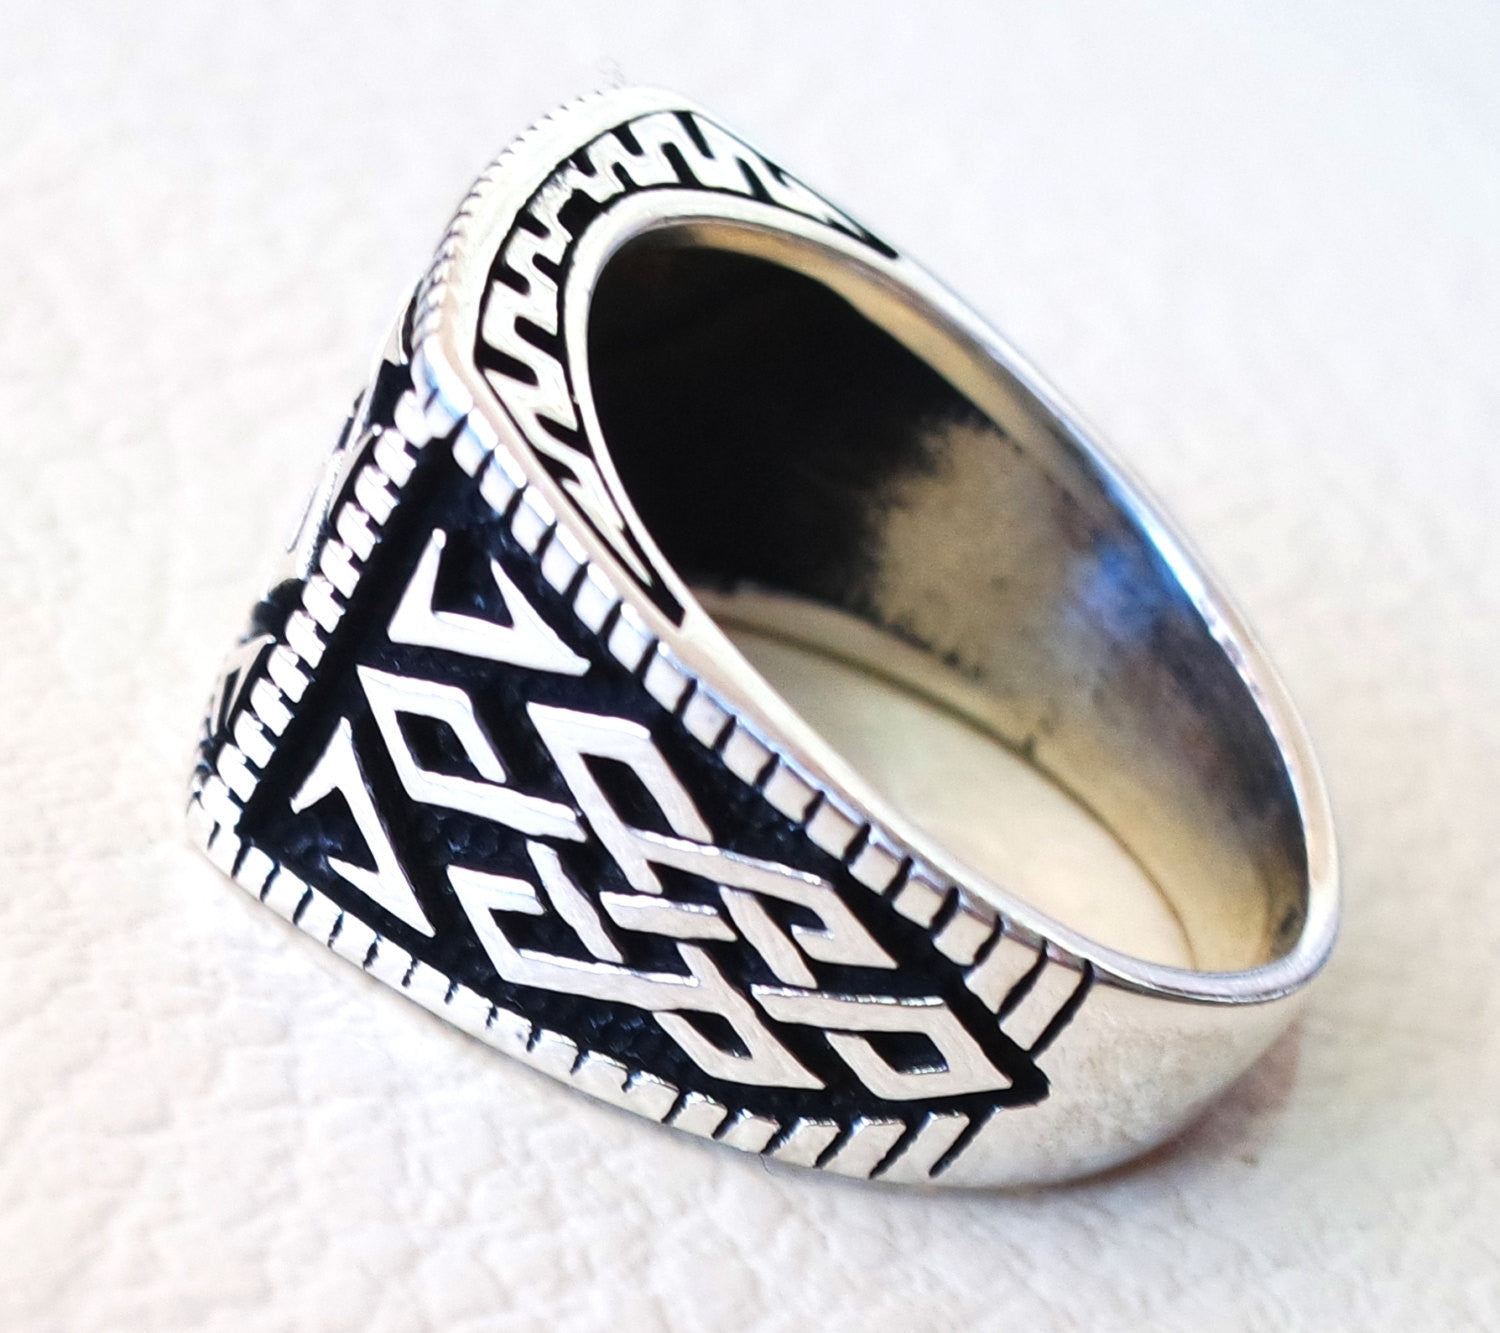 celtic sterling silver 925 heavy man ring rectangular shape any size antique style high quality jewelry